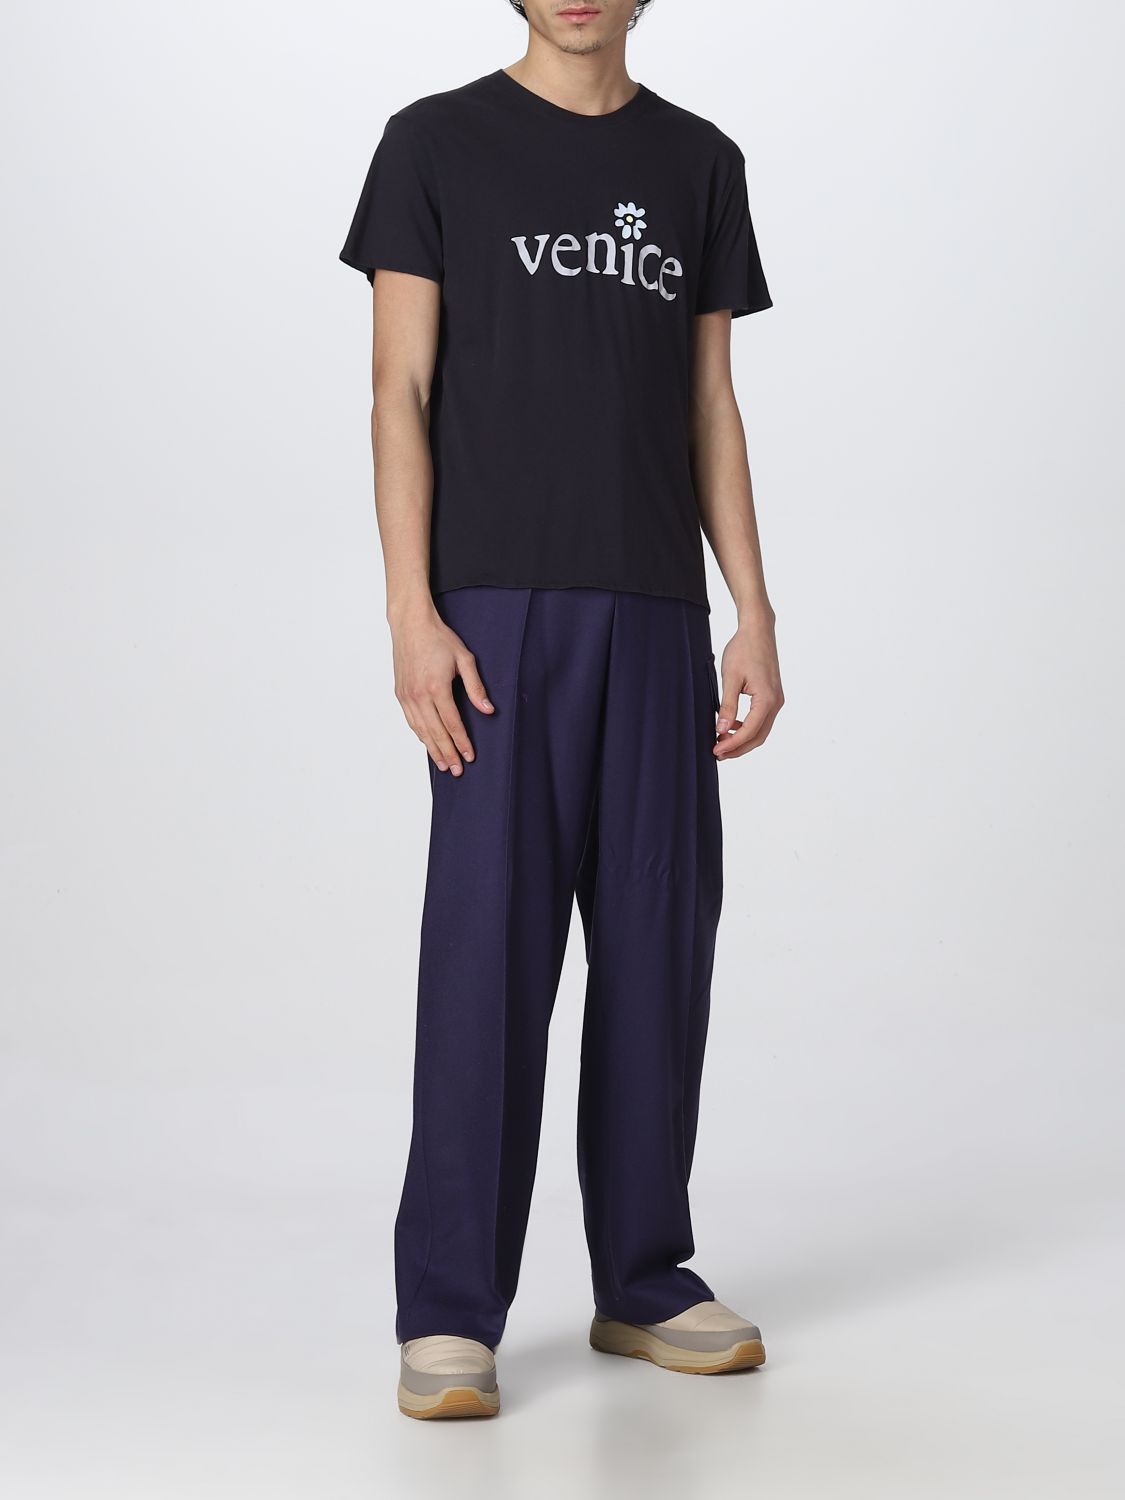 T-shirt Erl: T-shirt Erl con stampa venice nero 2